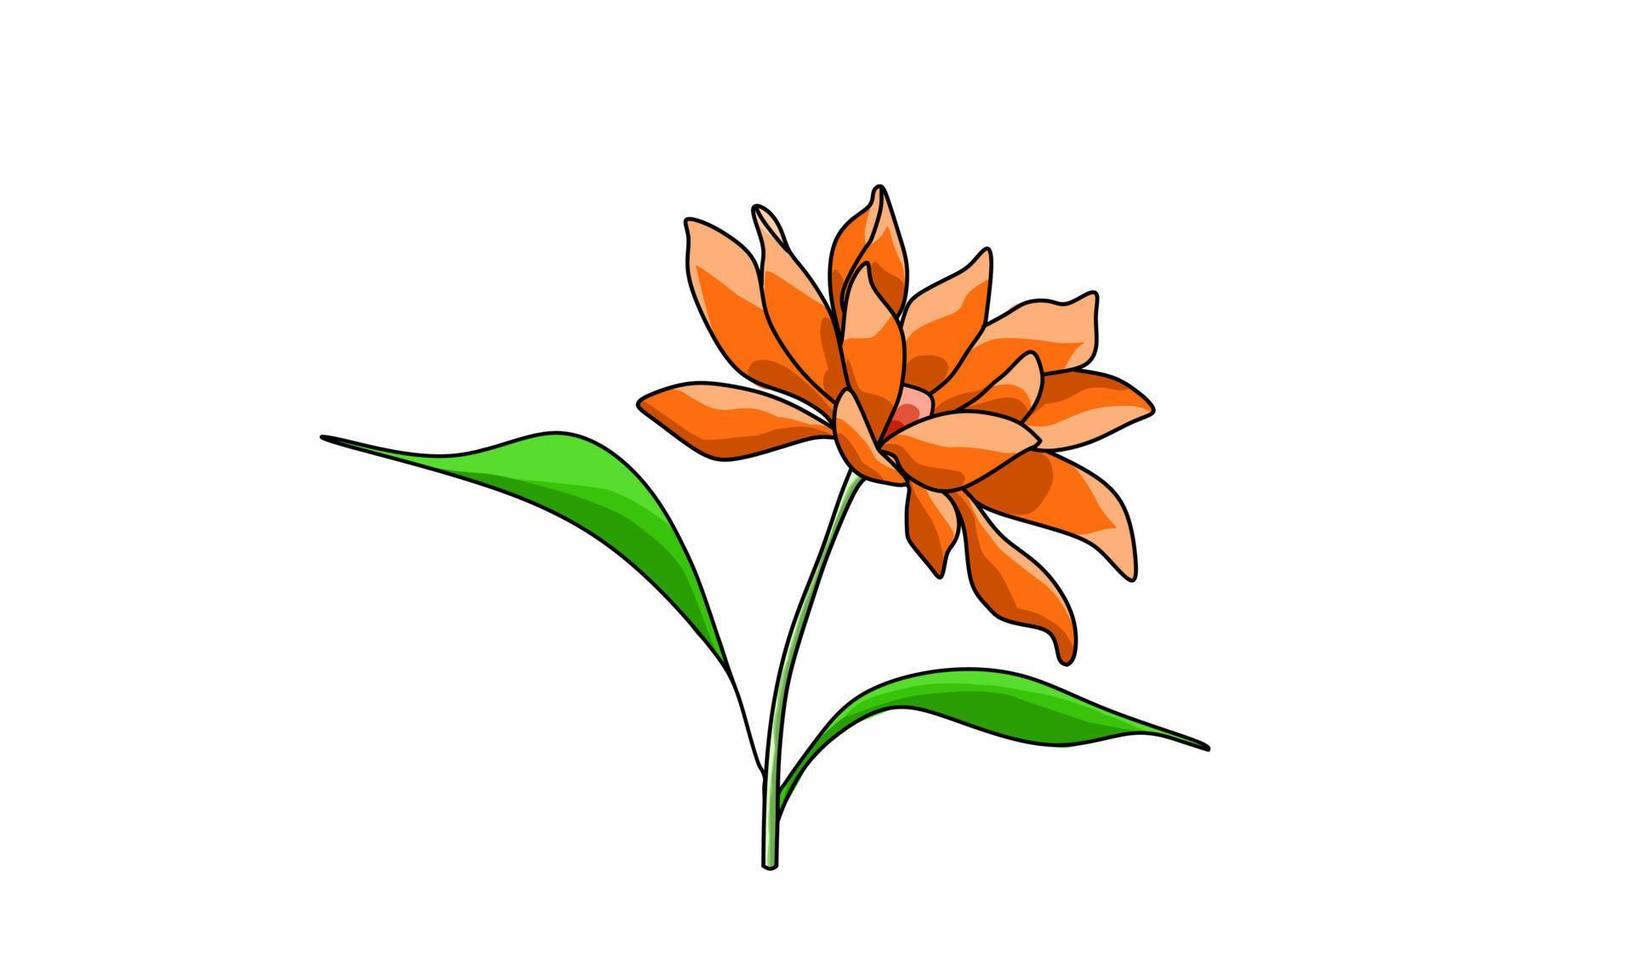 Lotus flower illustration. Or by another name Nymphaea. Flat design. Isolated white background vector